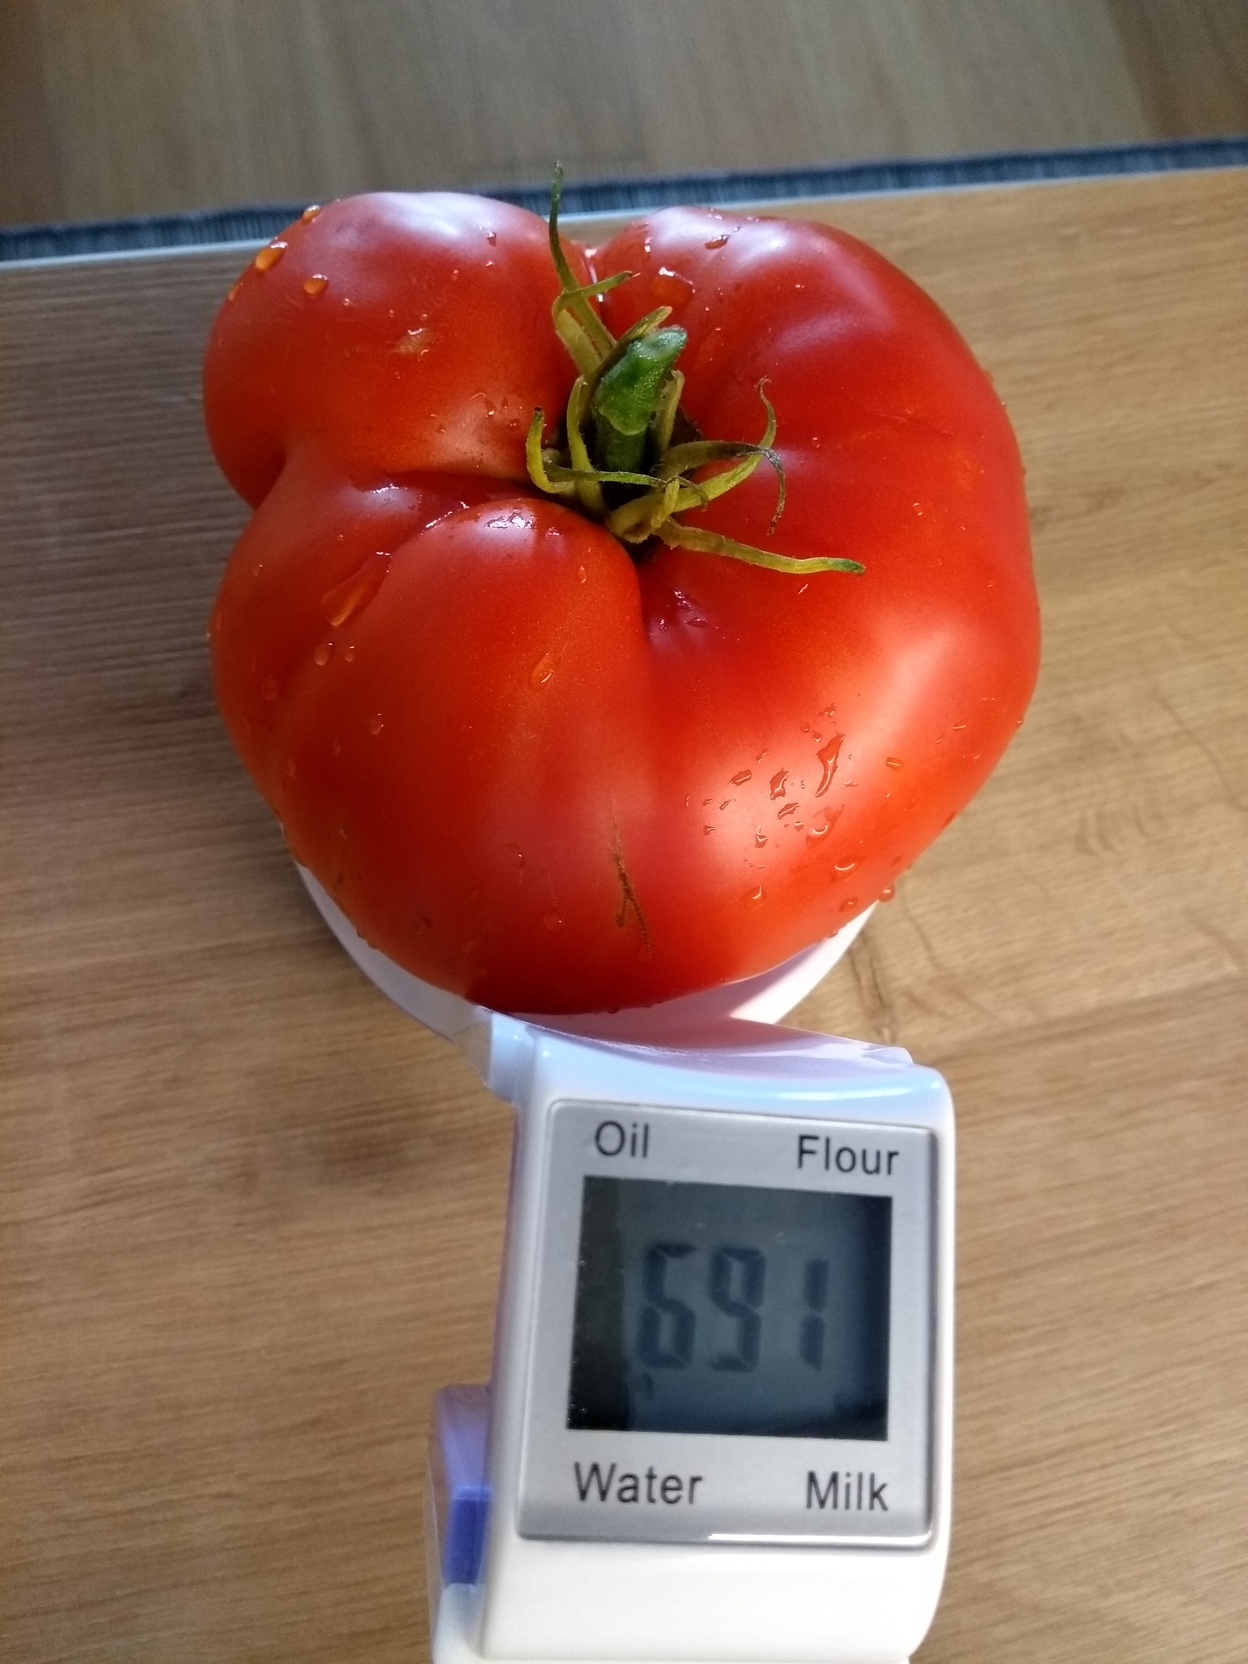 The biggest fruit so far -  a whoping 691 grams